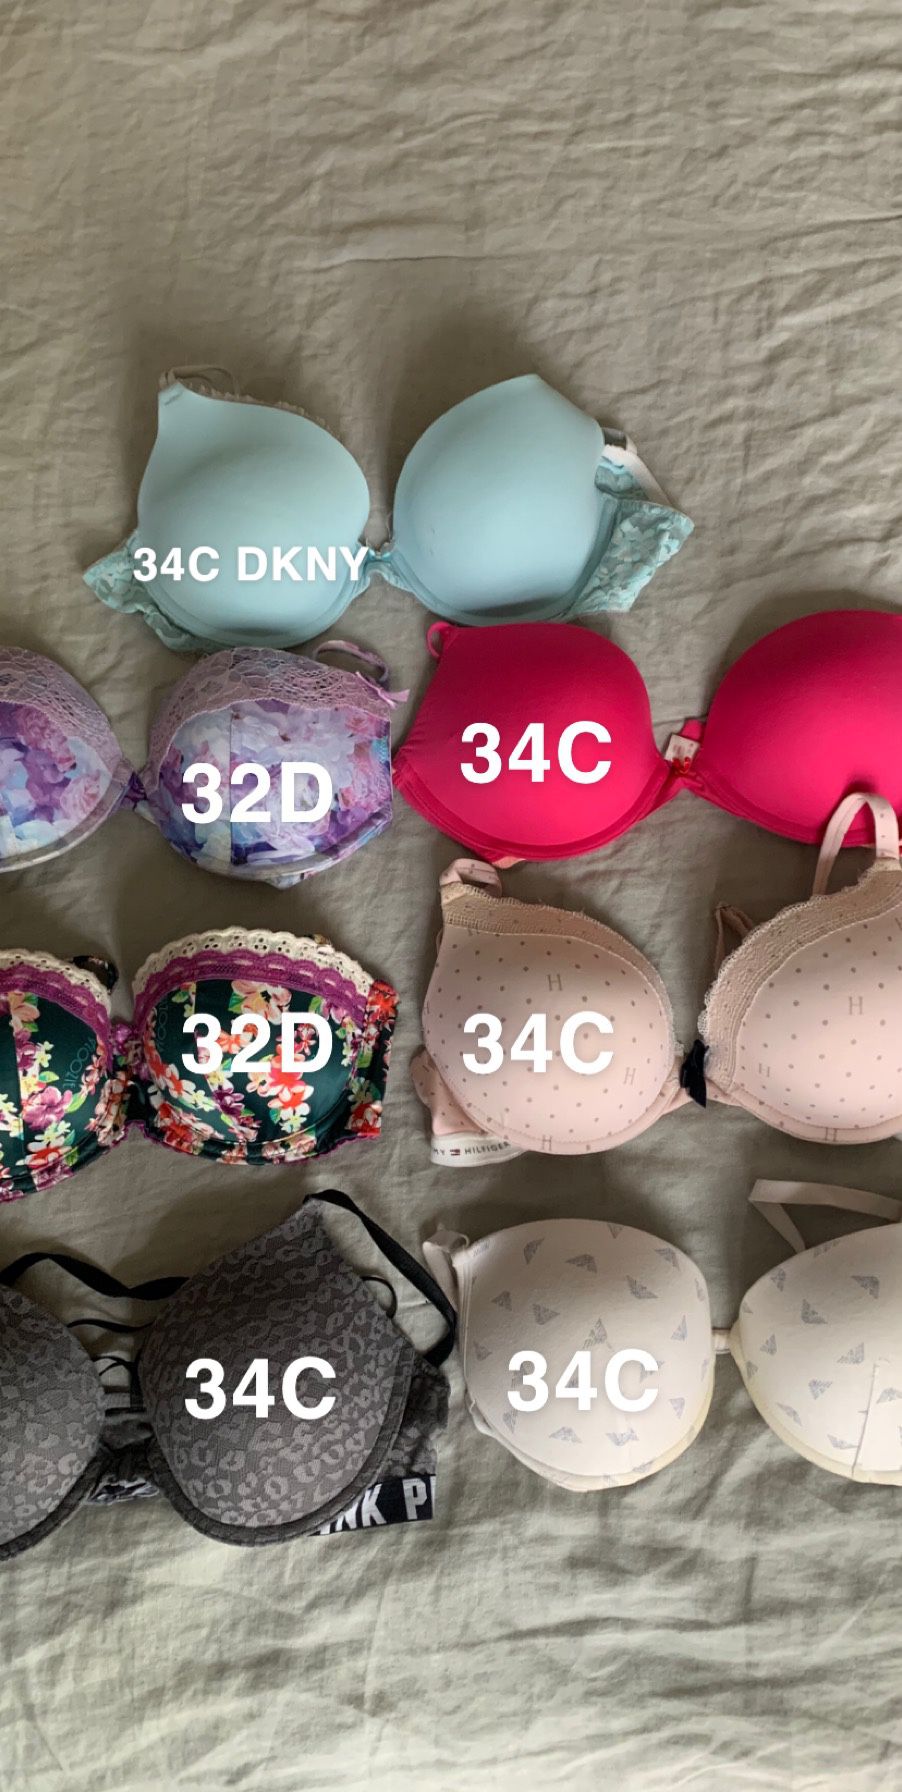 7 padded Bras Different Brand Emporio Armani , Pink , Tommy & more sizes 34C most of them